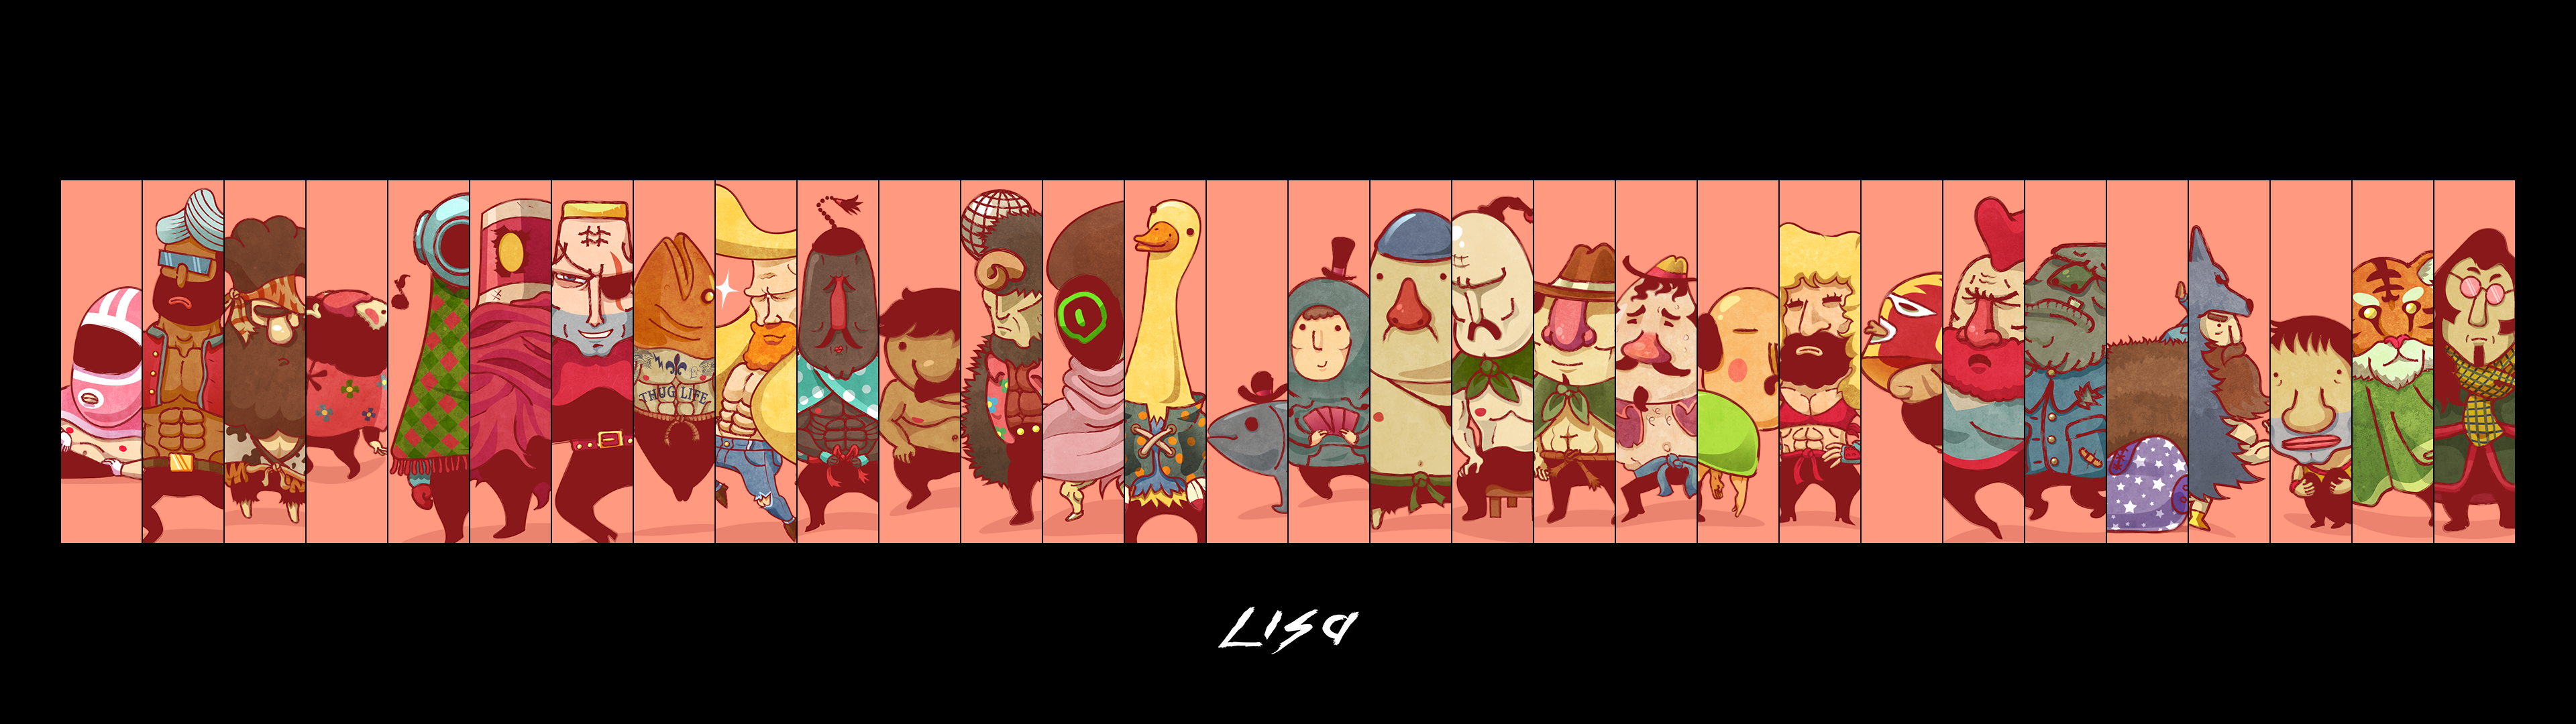 Lisa the painful rpg